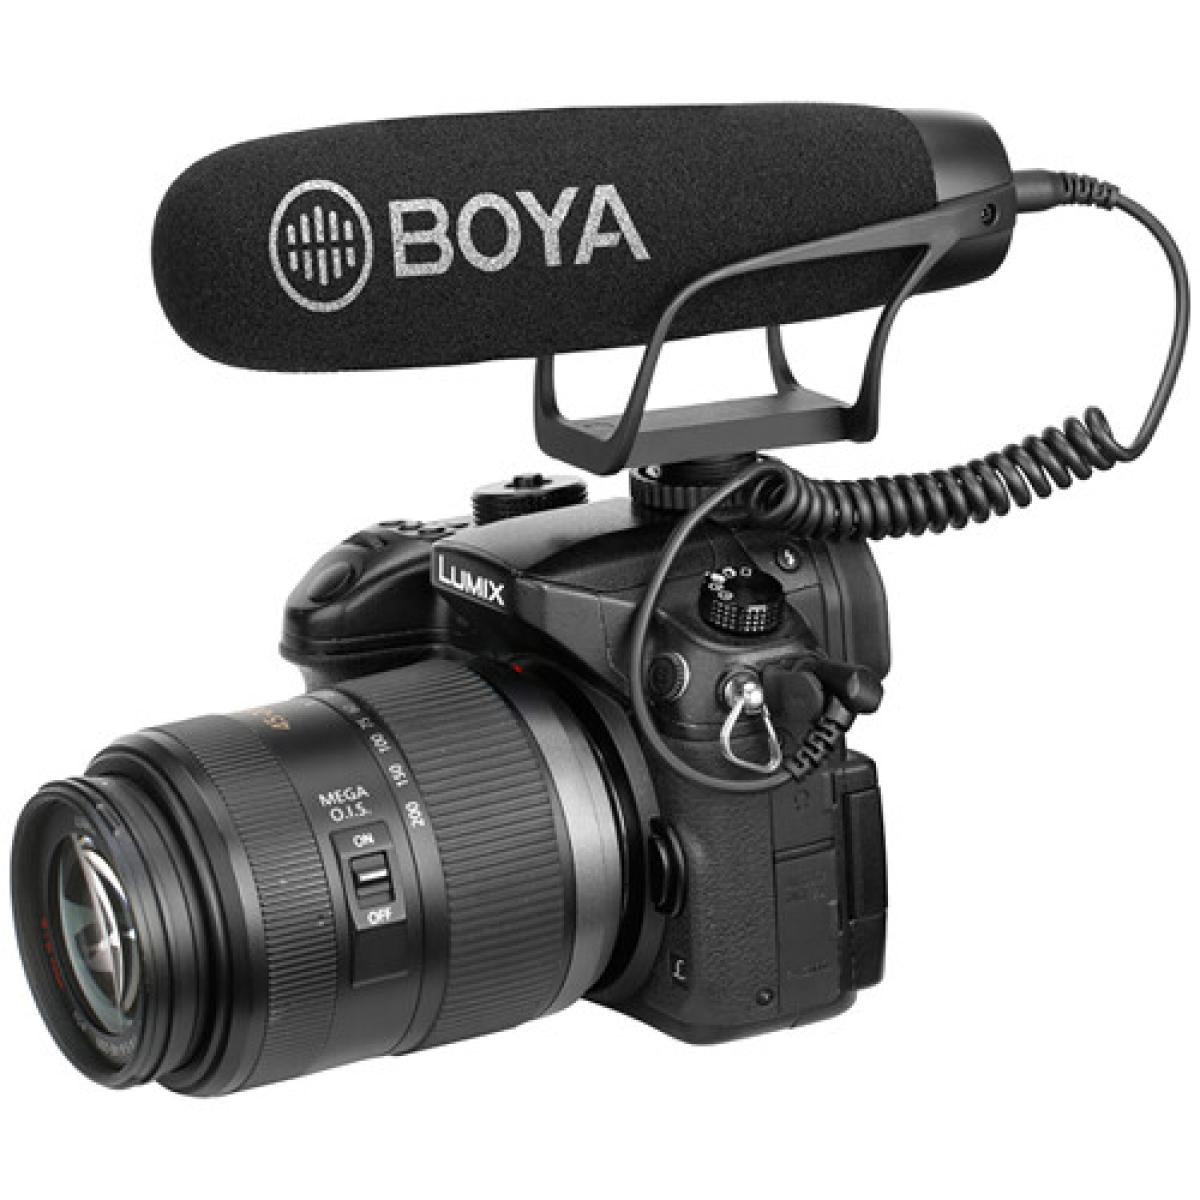 BOYA Wired On-Camera Super-Cardioid Shotgun Microphone for PC Laptops and Smartphone